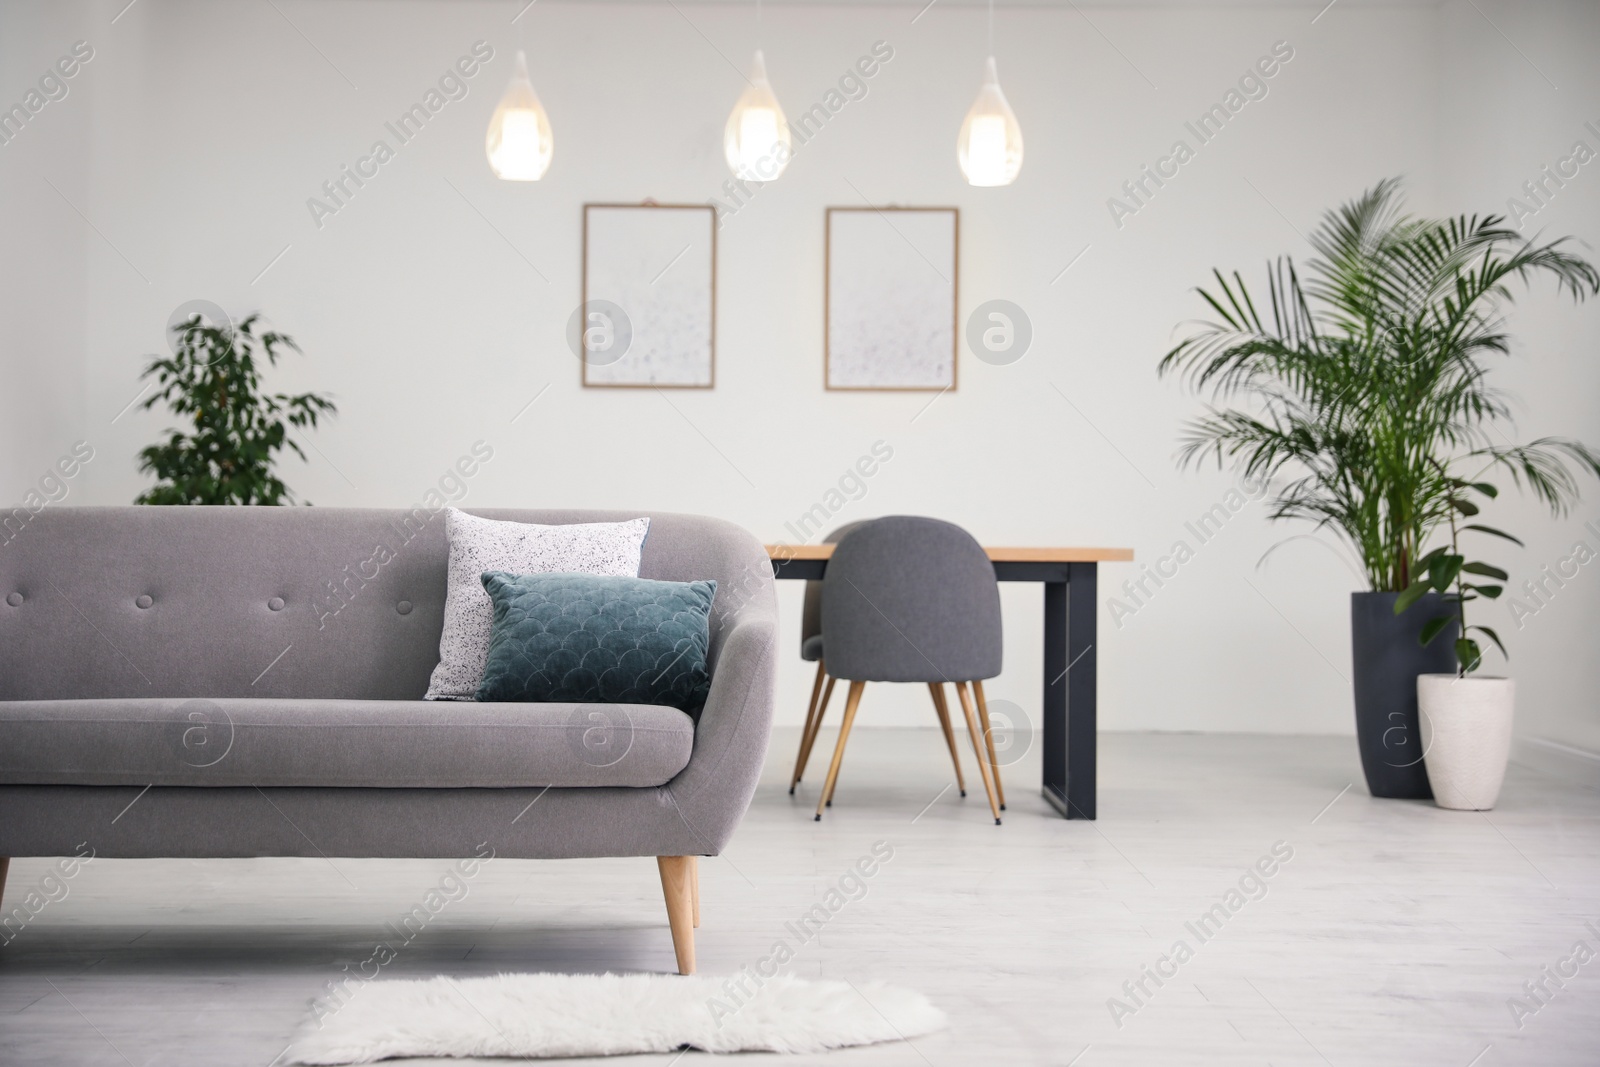 Photo of Soft pillows on grey sofa in living room